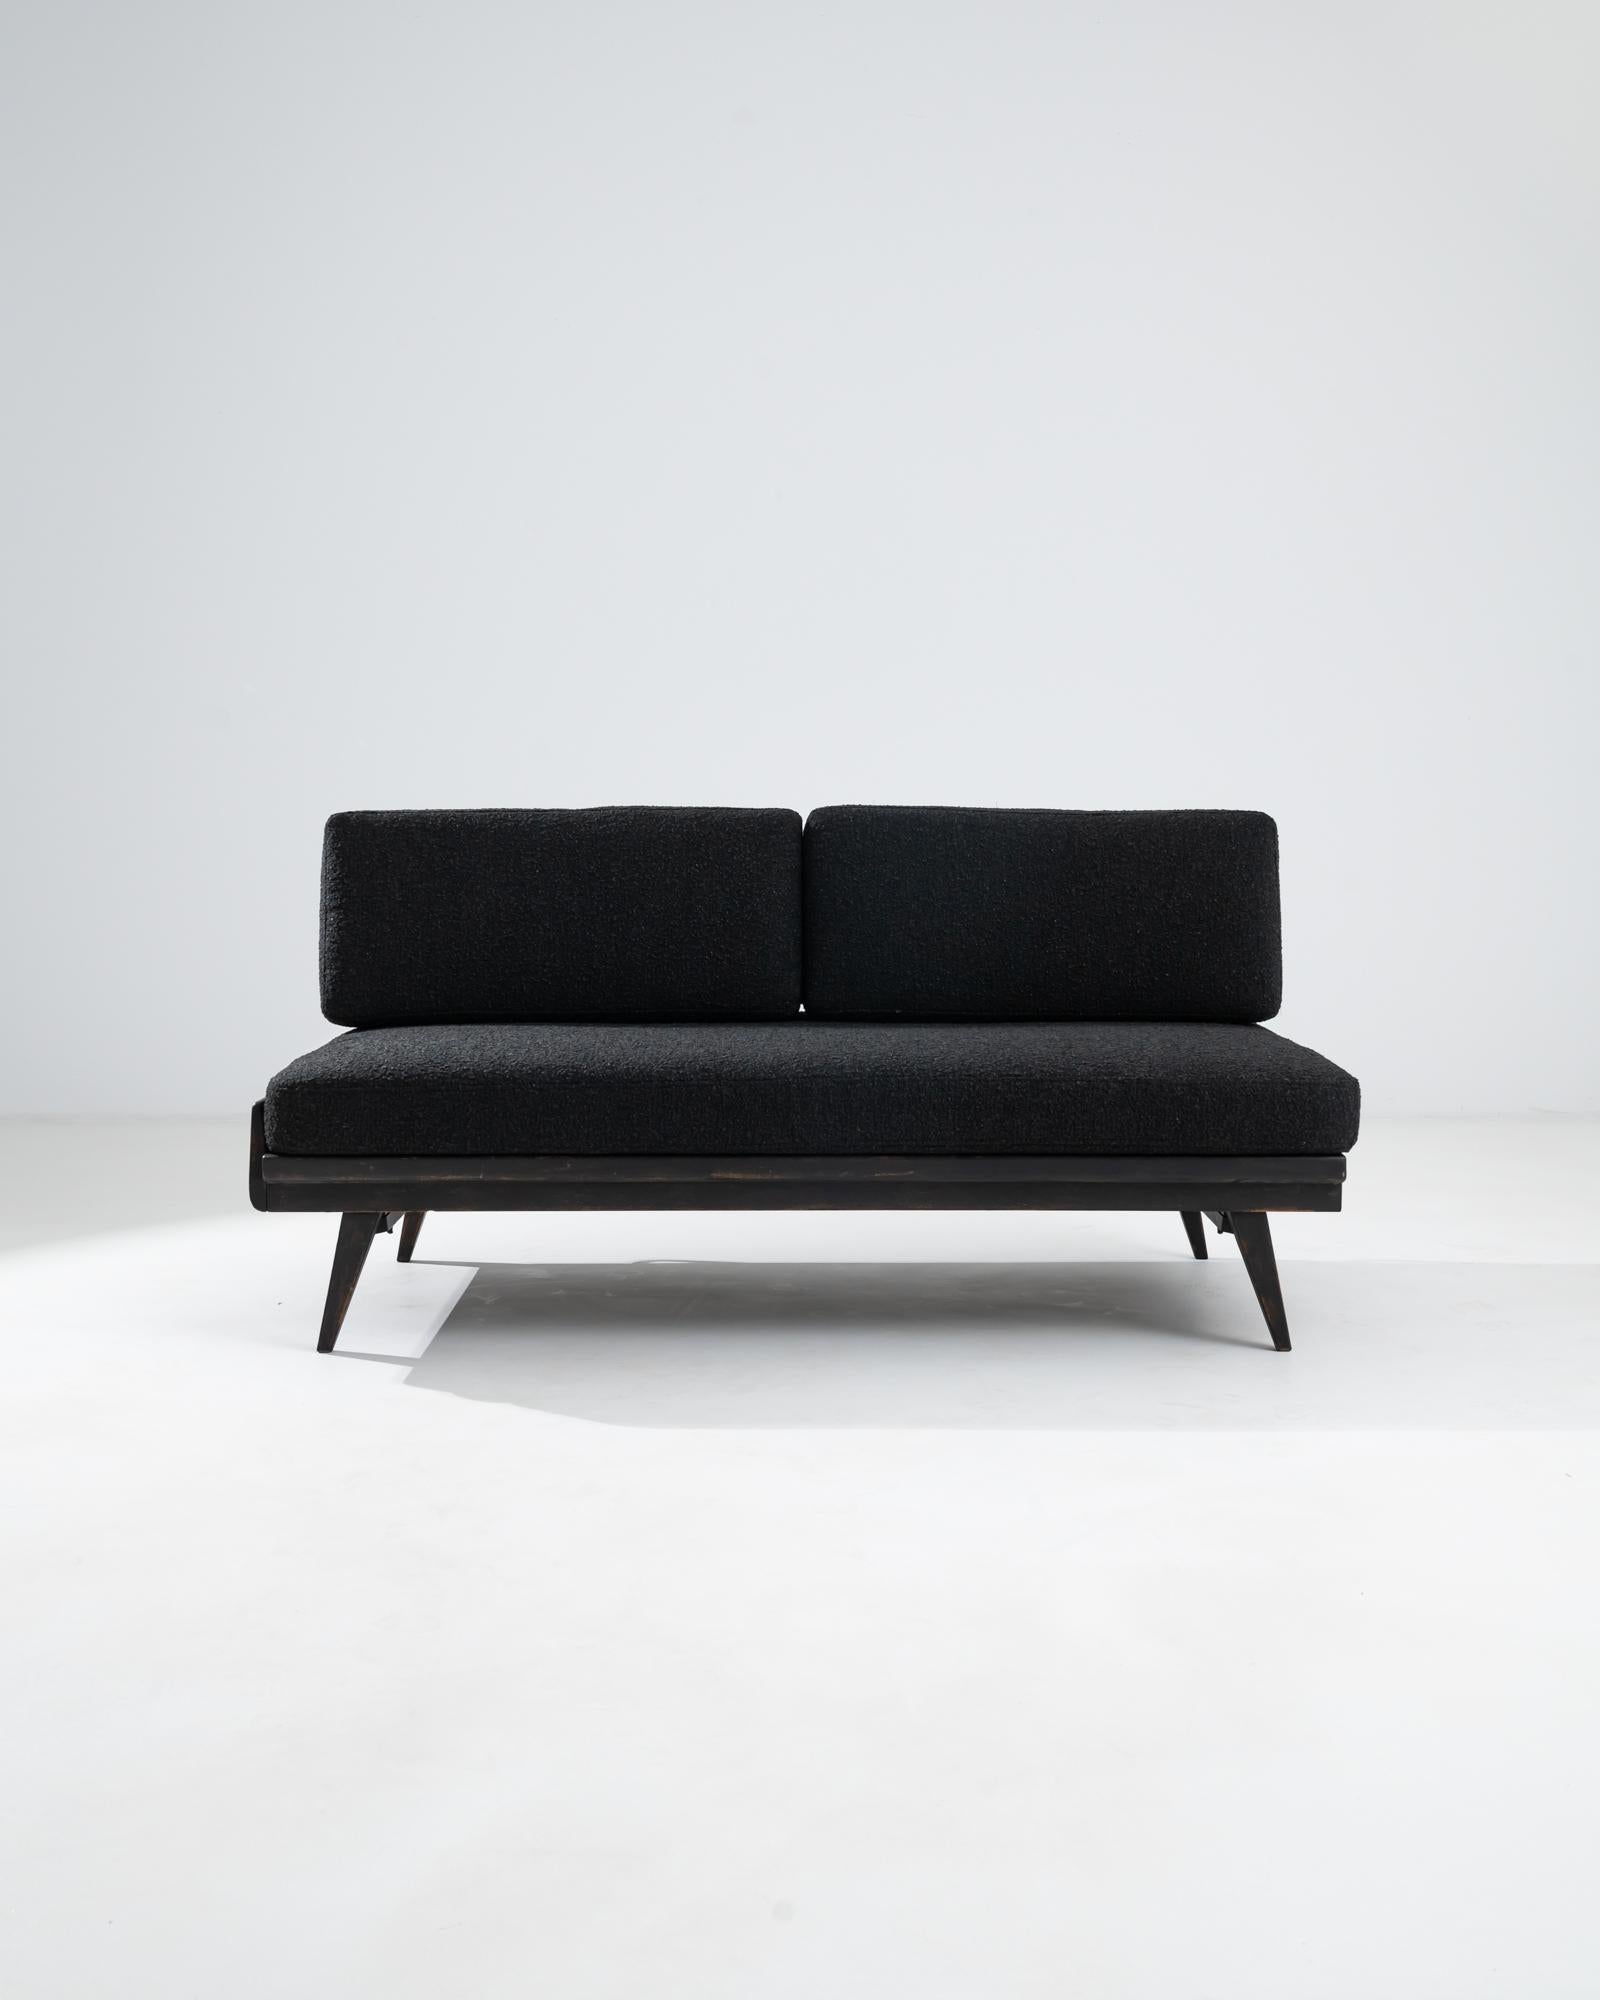 A Scandinavian upholstered sofa from the 1960s. Scandinavian Modern design is famous in its blend of form and function, his sofa is true to its lineage with an elegant combination of mechanical design. Metal tubes connect attractively to its lightly